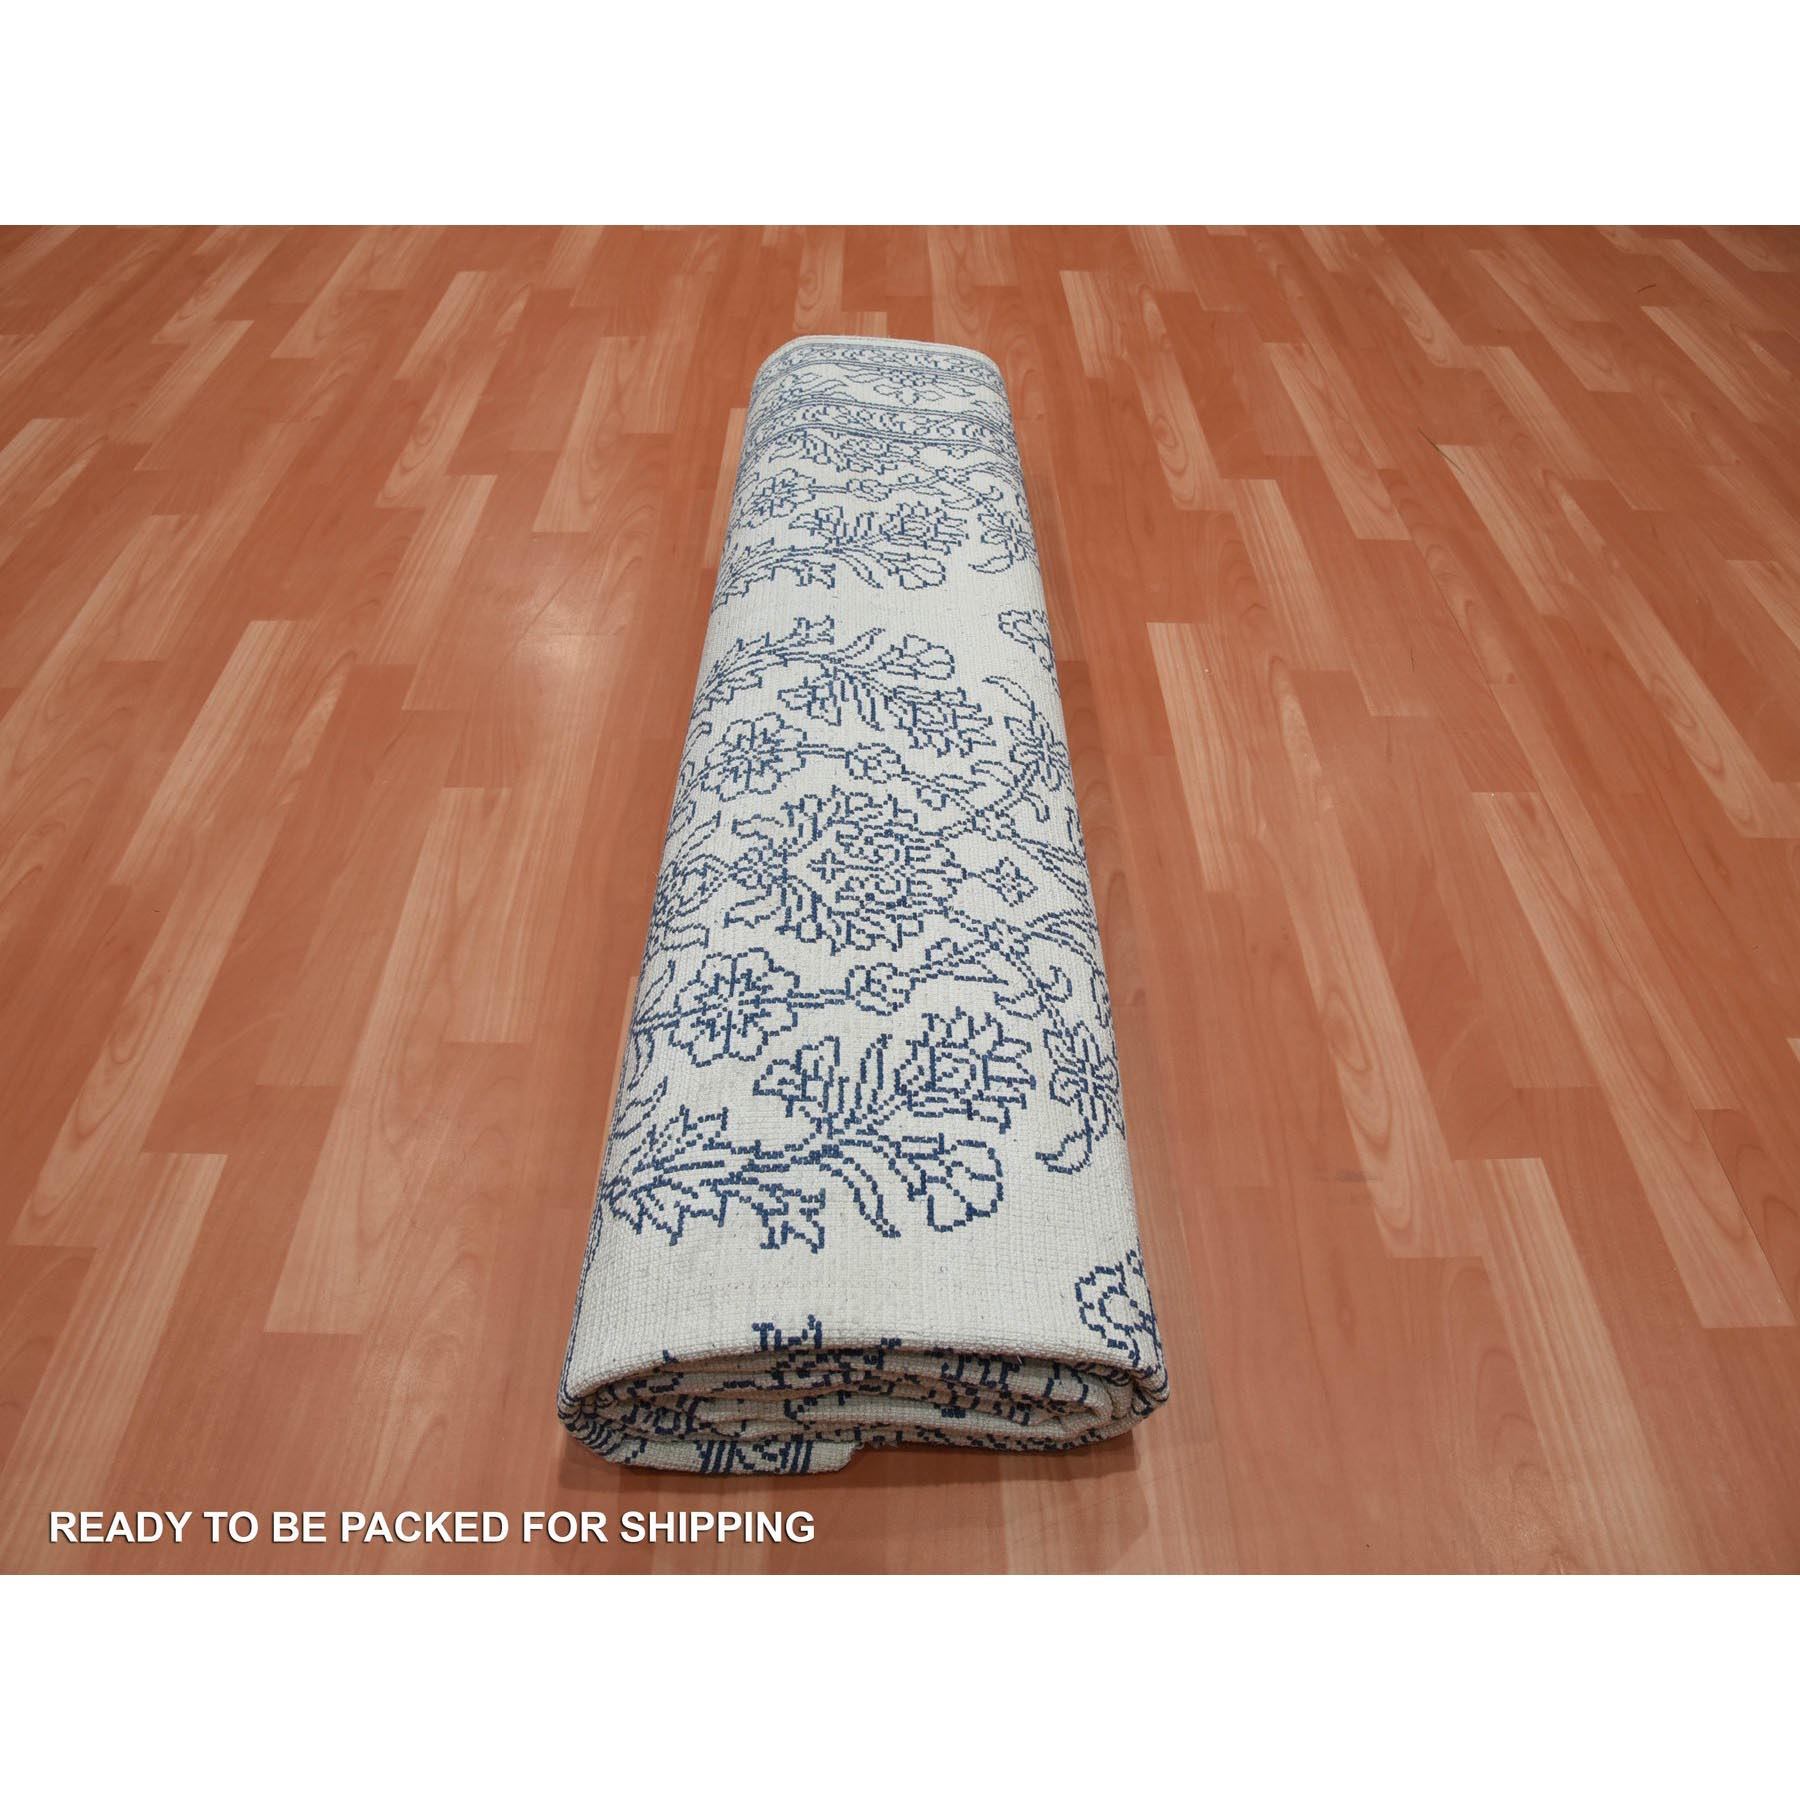 Transitional-Hand-Knotted-Rug-376075